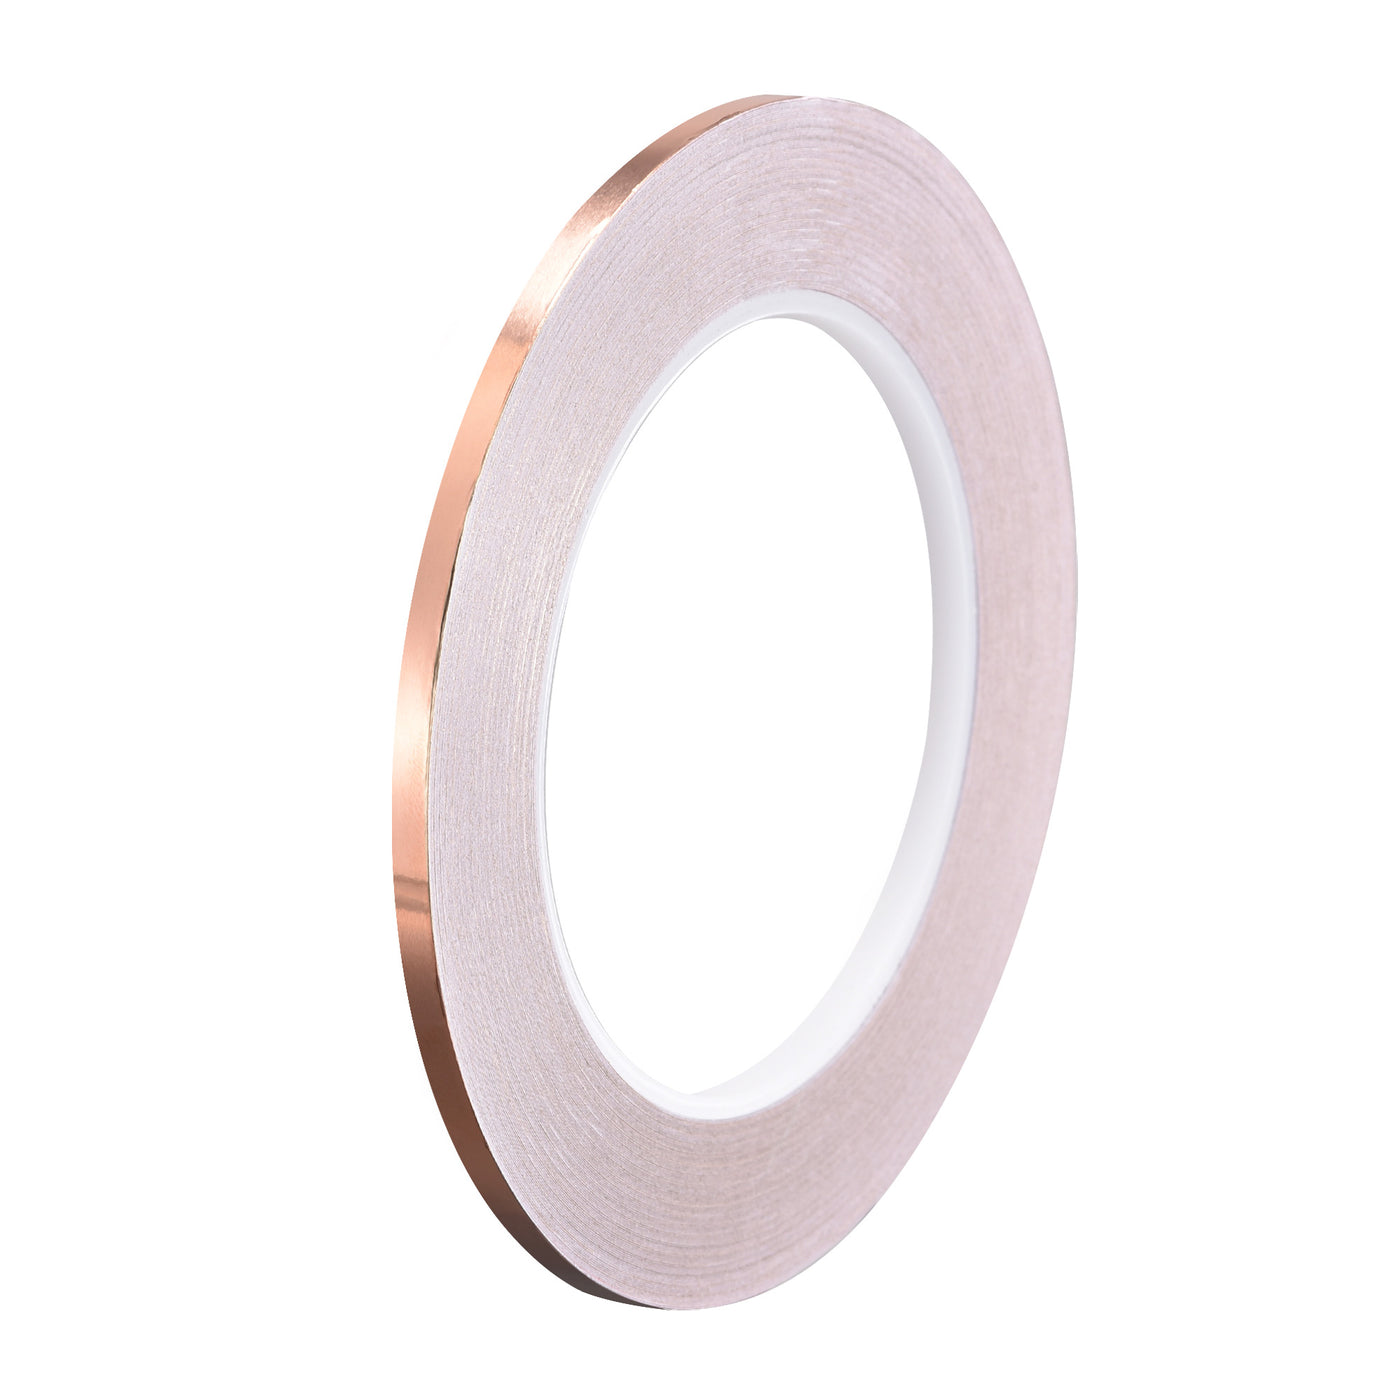 Uxcell Uxcell Single-Sided Conductive Tape Copper Foil Tape 30mm x 30m/98.4ft 1pcs